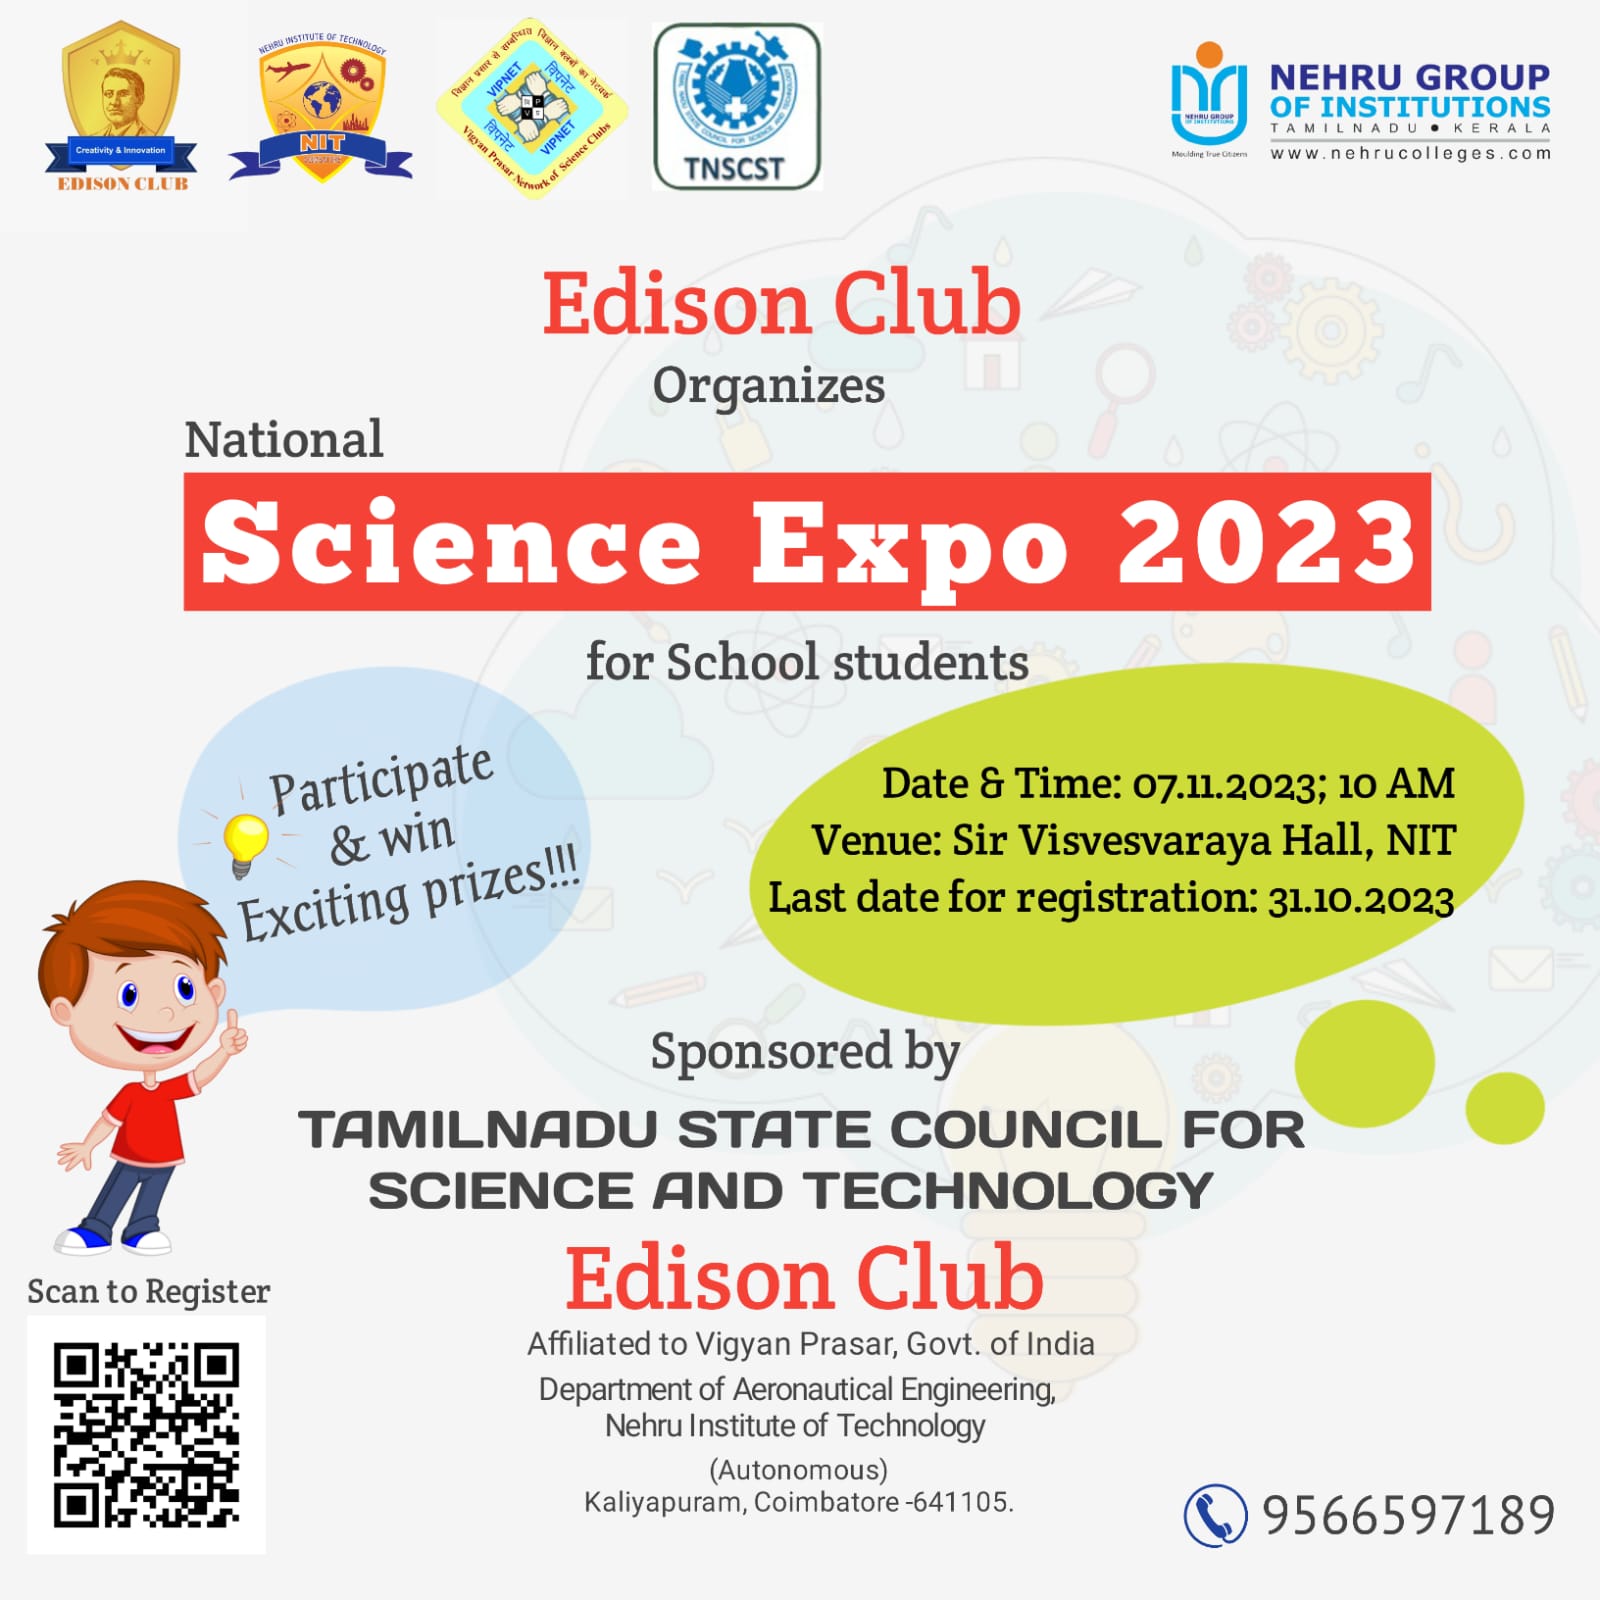 National Science Expo 2023